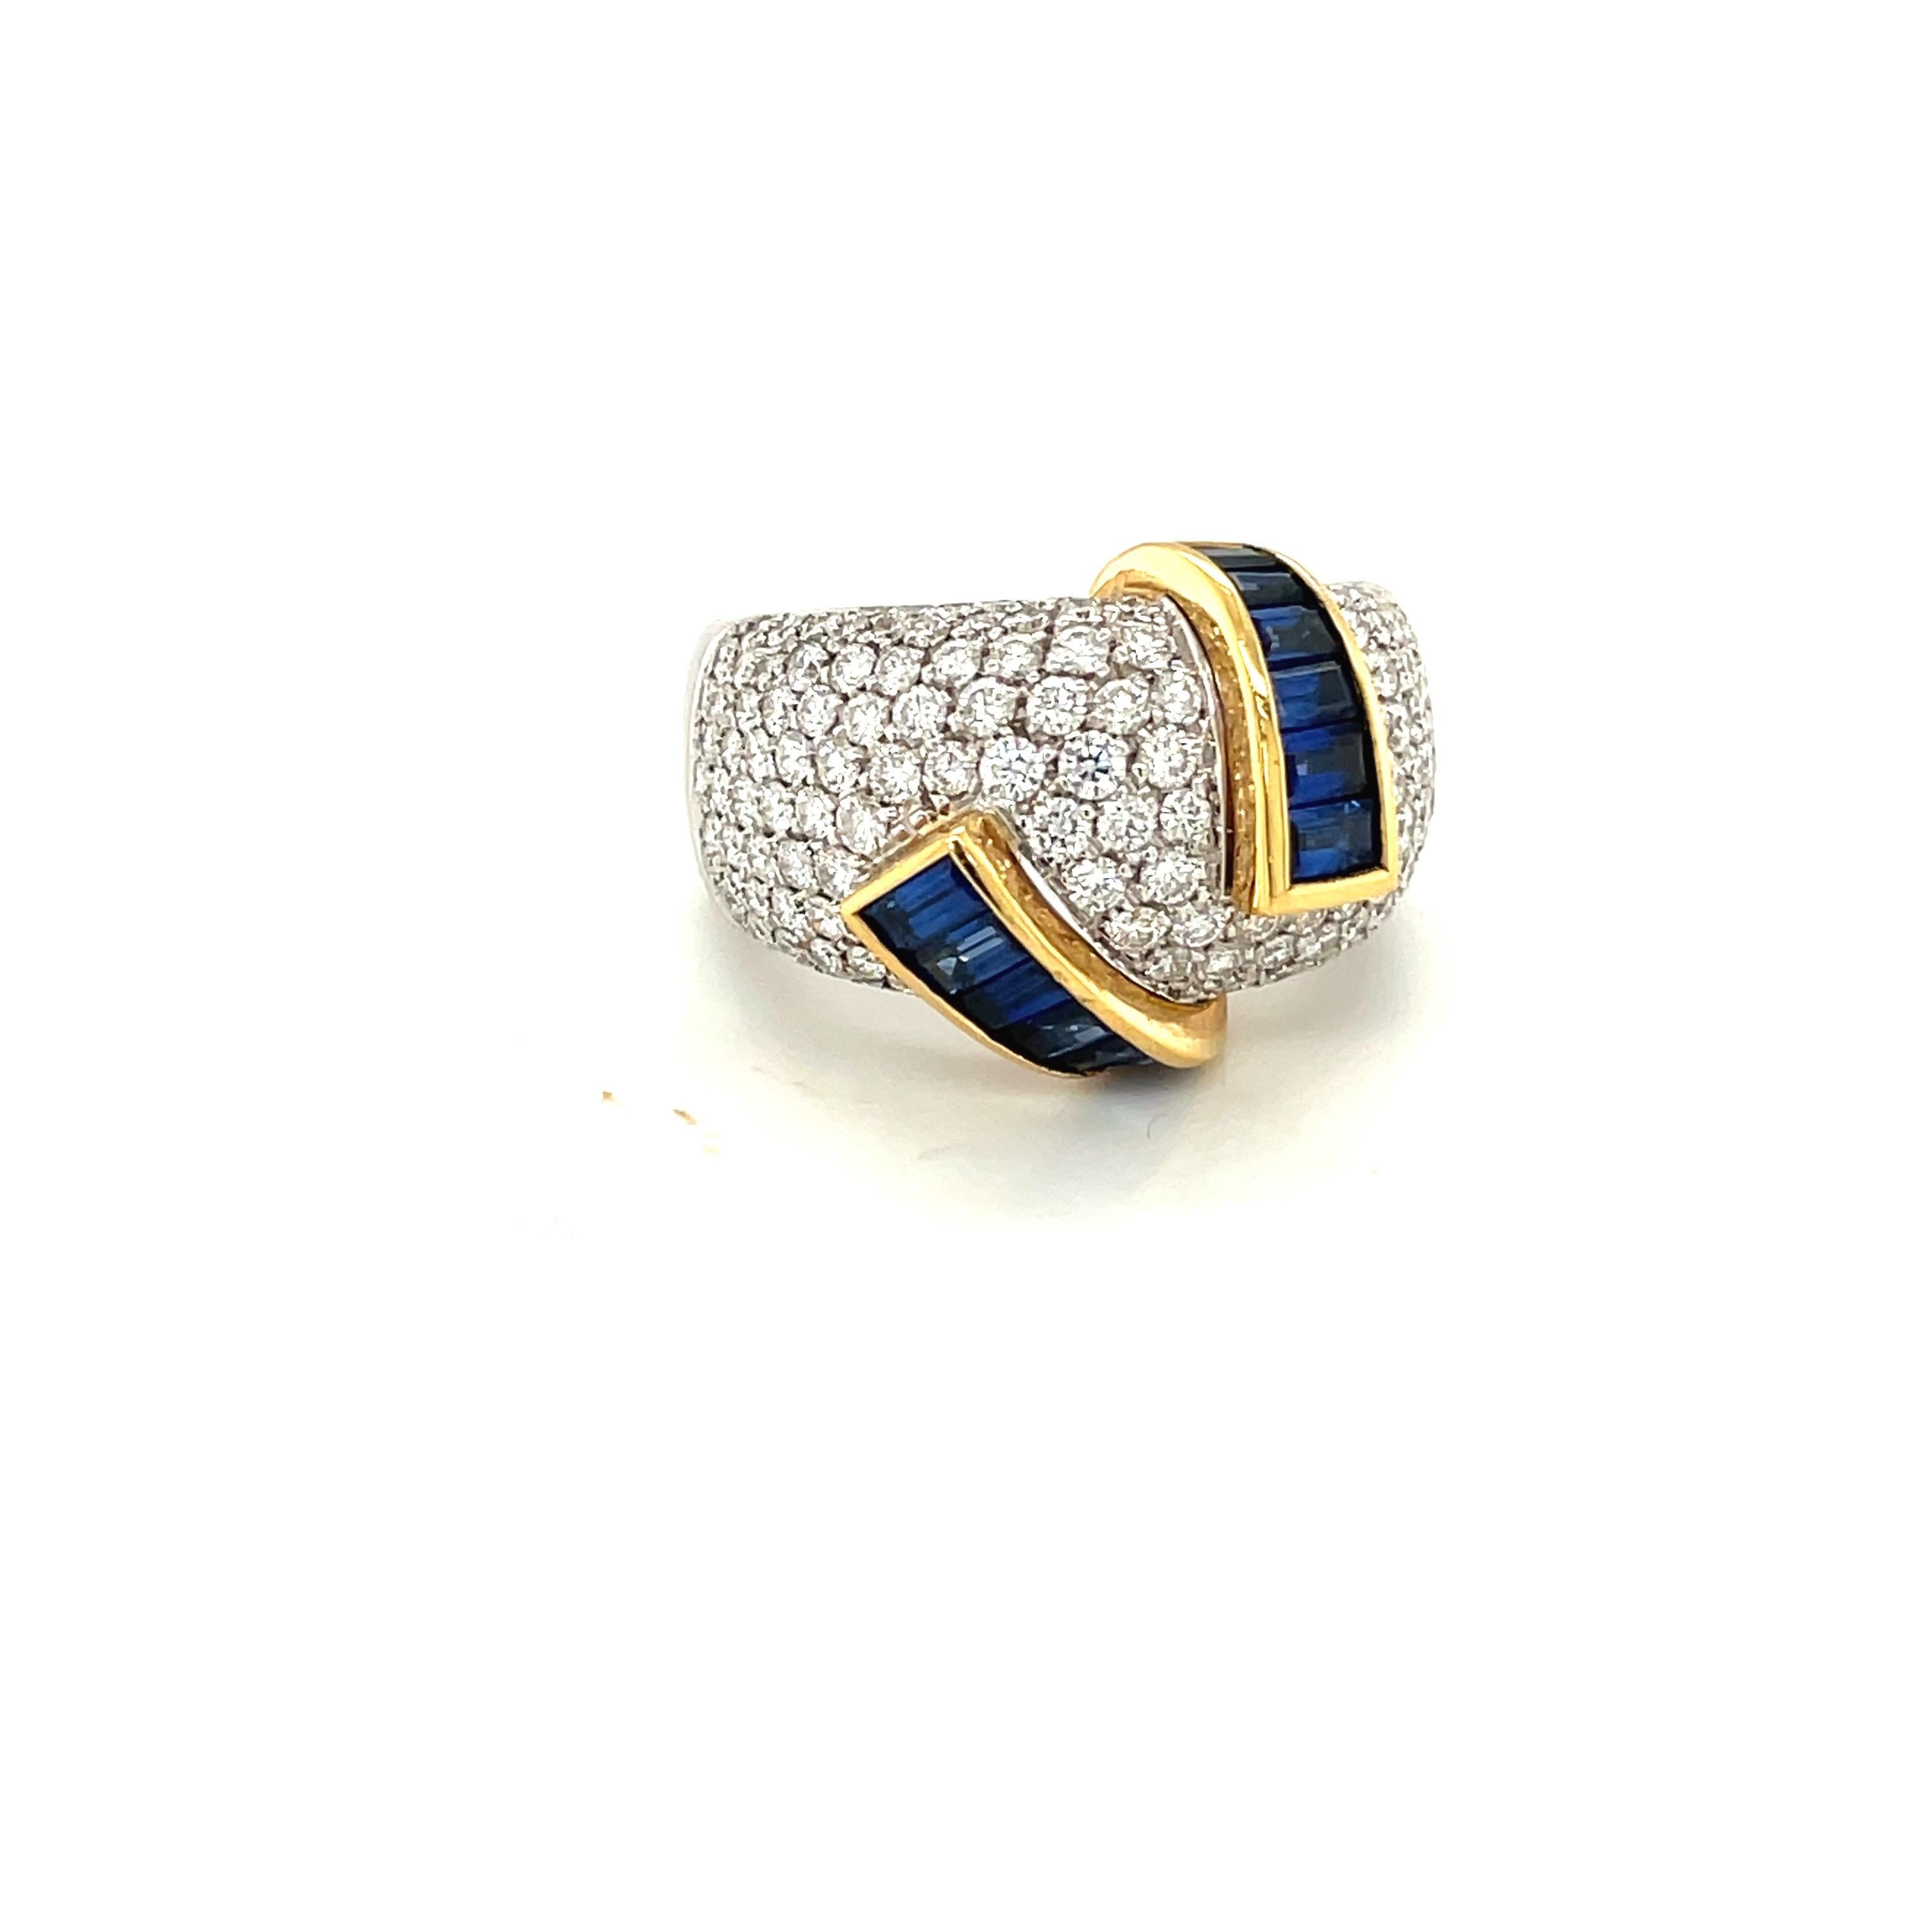 Alfiere & St. John 18KT Gold, Diamond 1.99 Carat and Blue Sapphire 2.15Ct. Ring For Sale 3